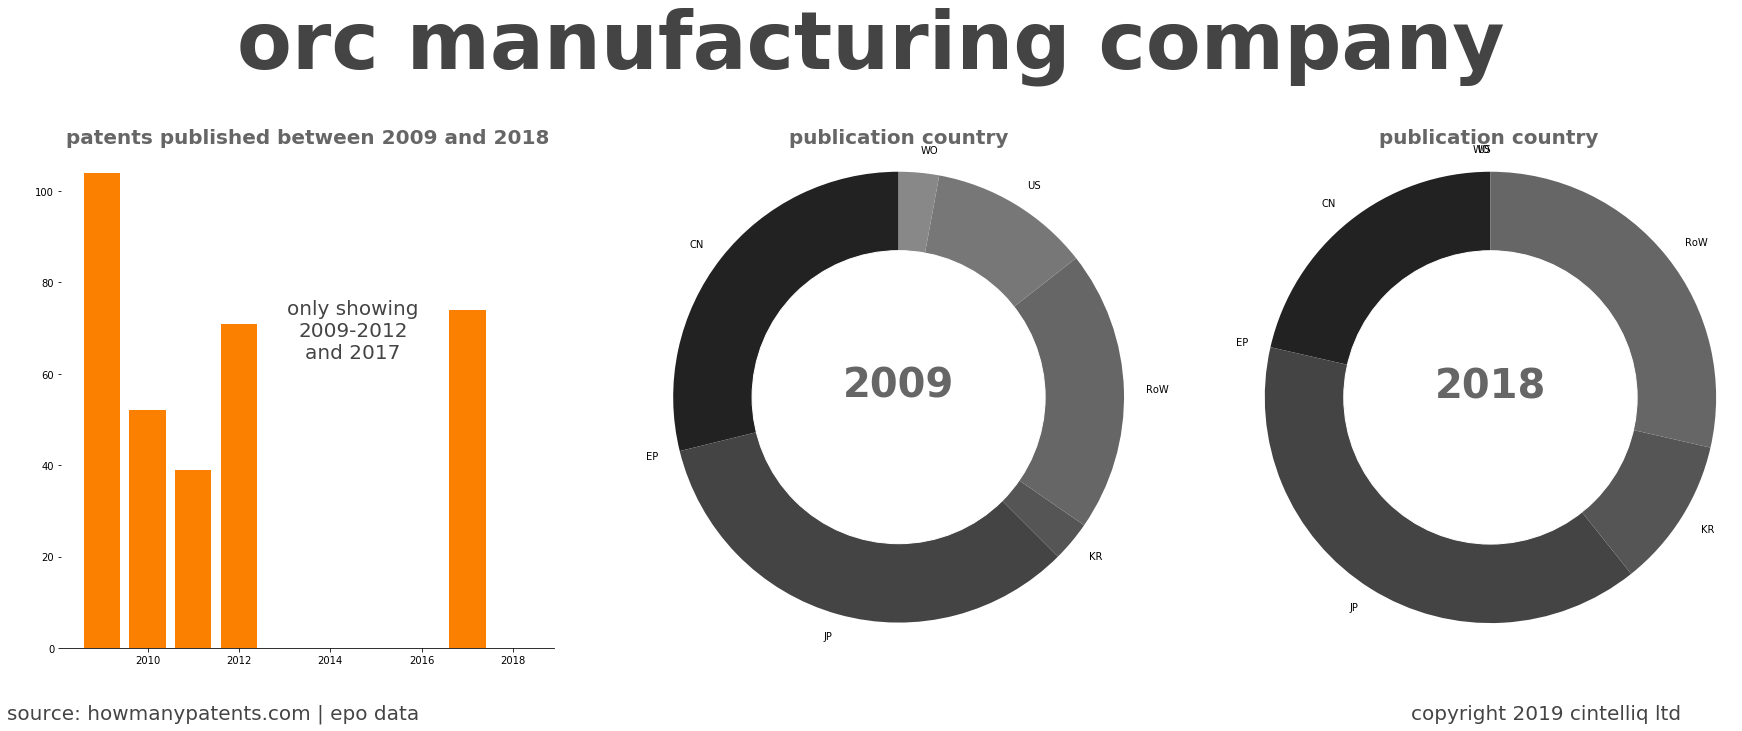 summary of patents for Orc Manufacturing Company